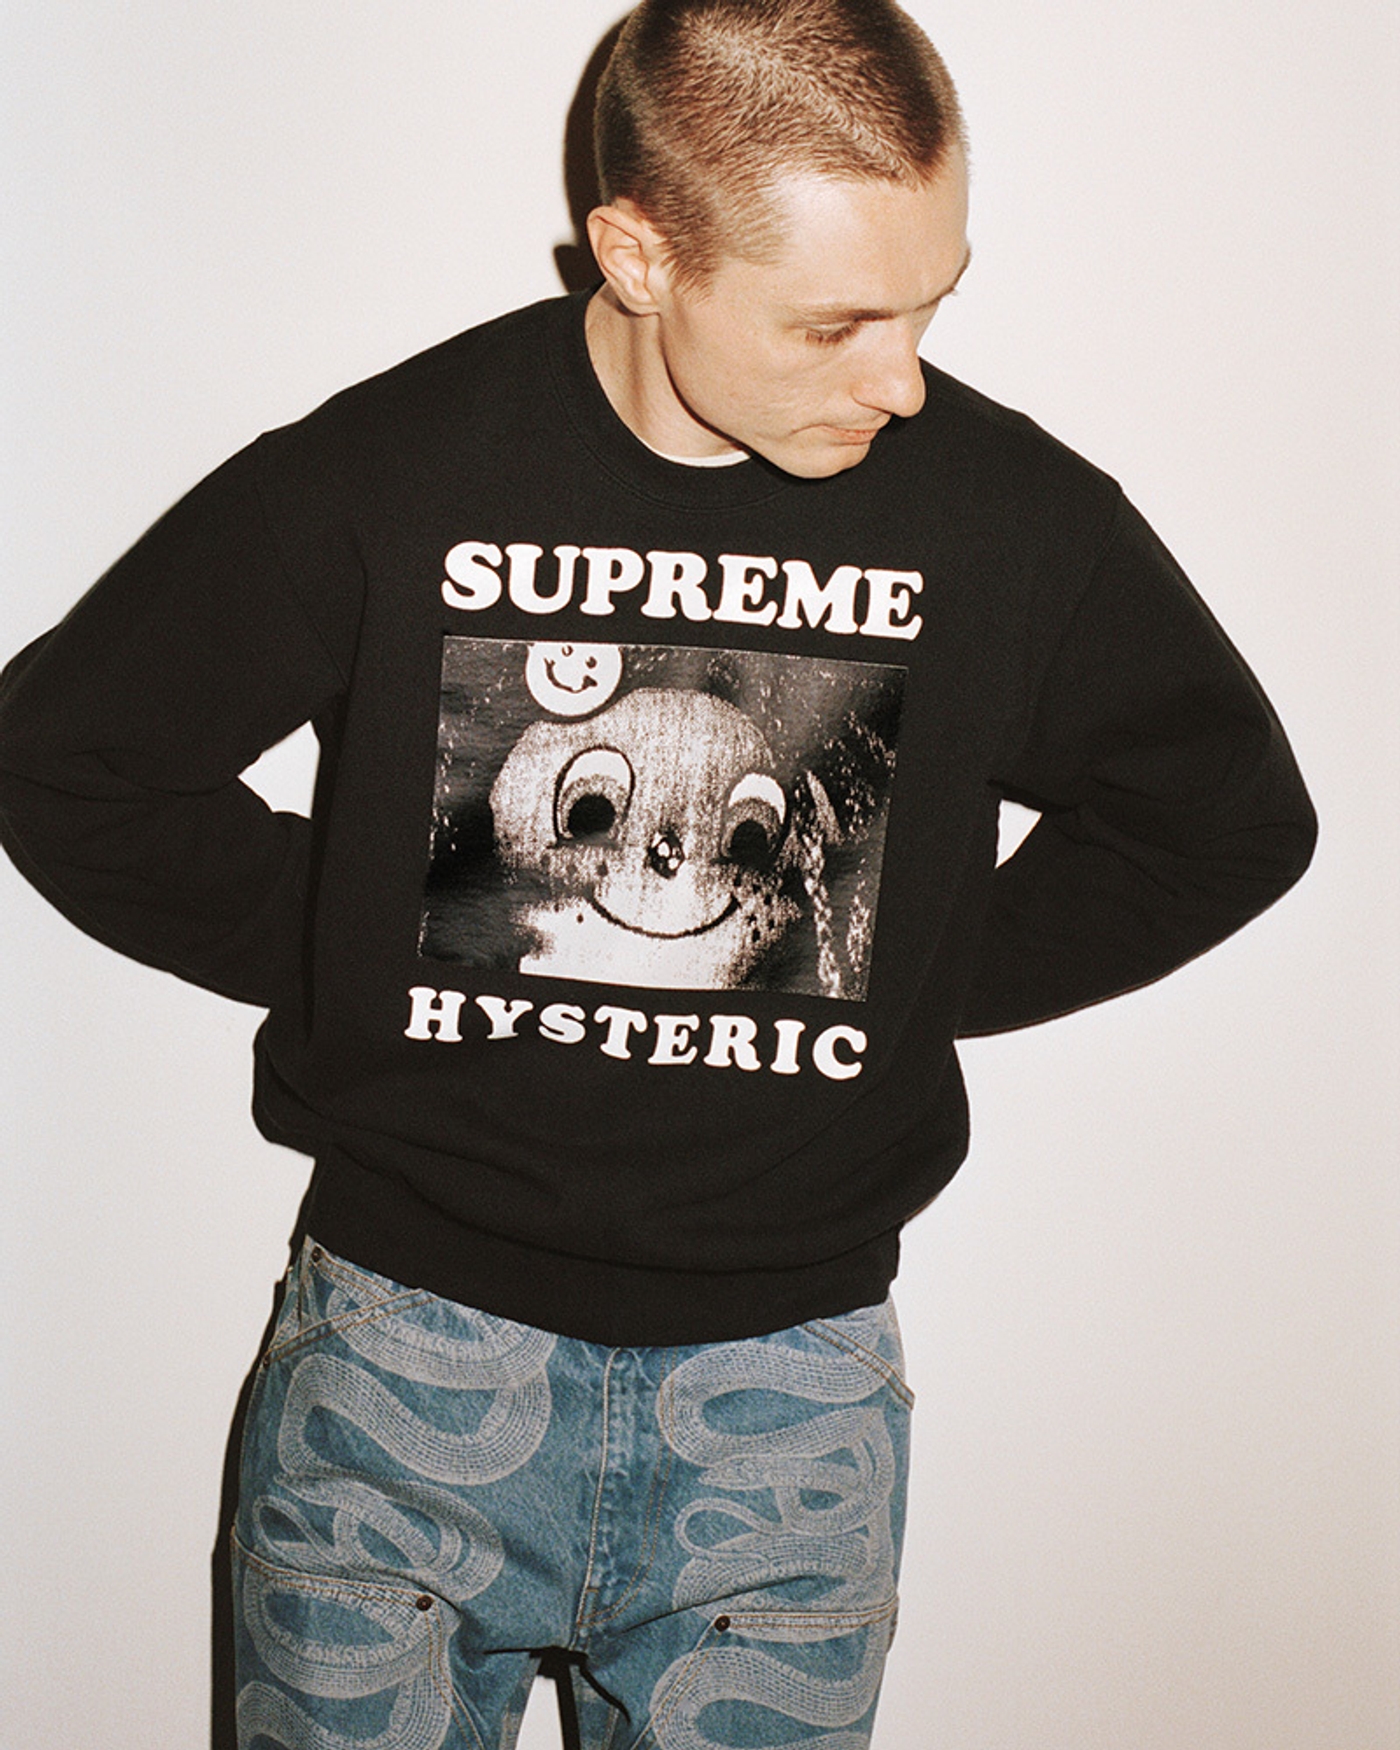 Supreme®/HYSTERIC GLAMOUR (13) (13/66)